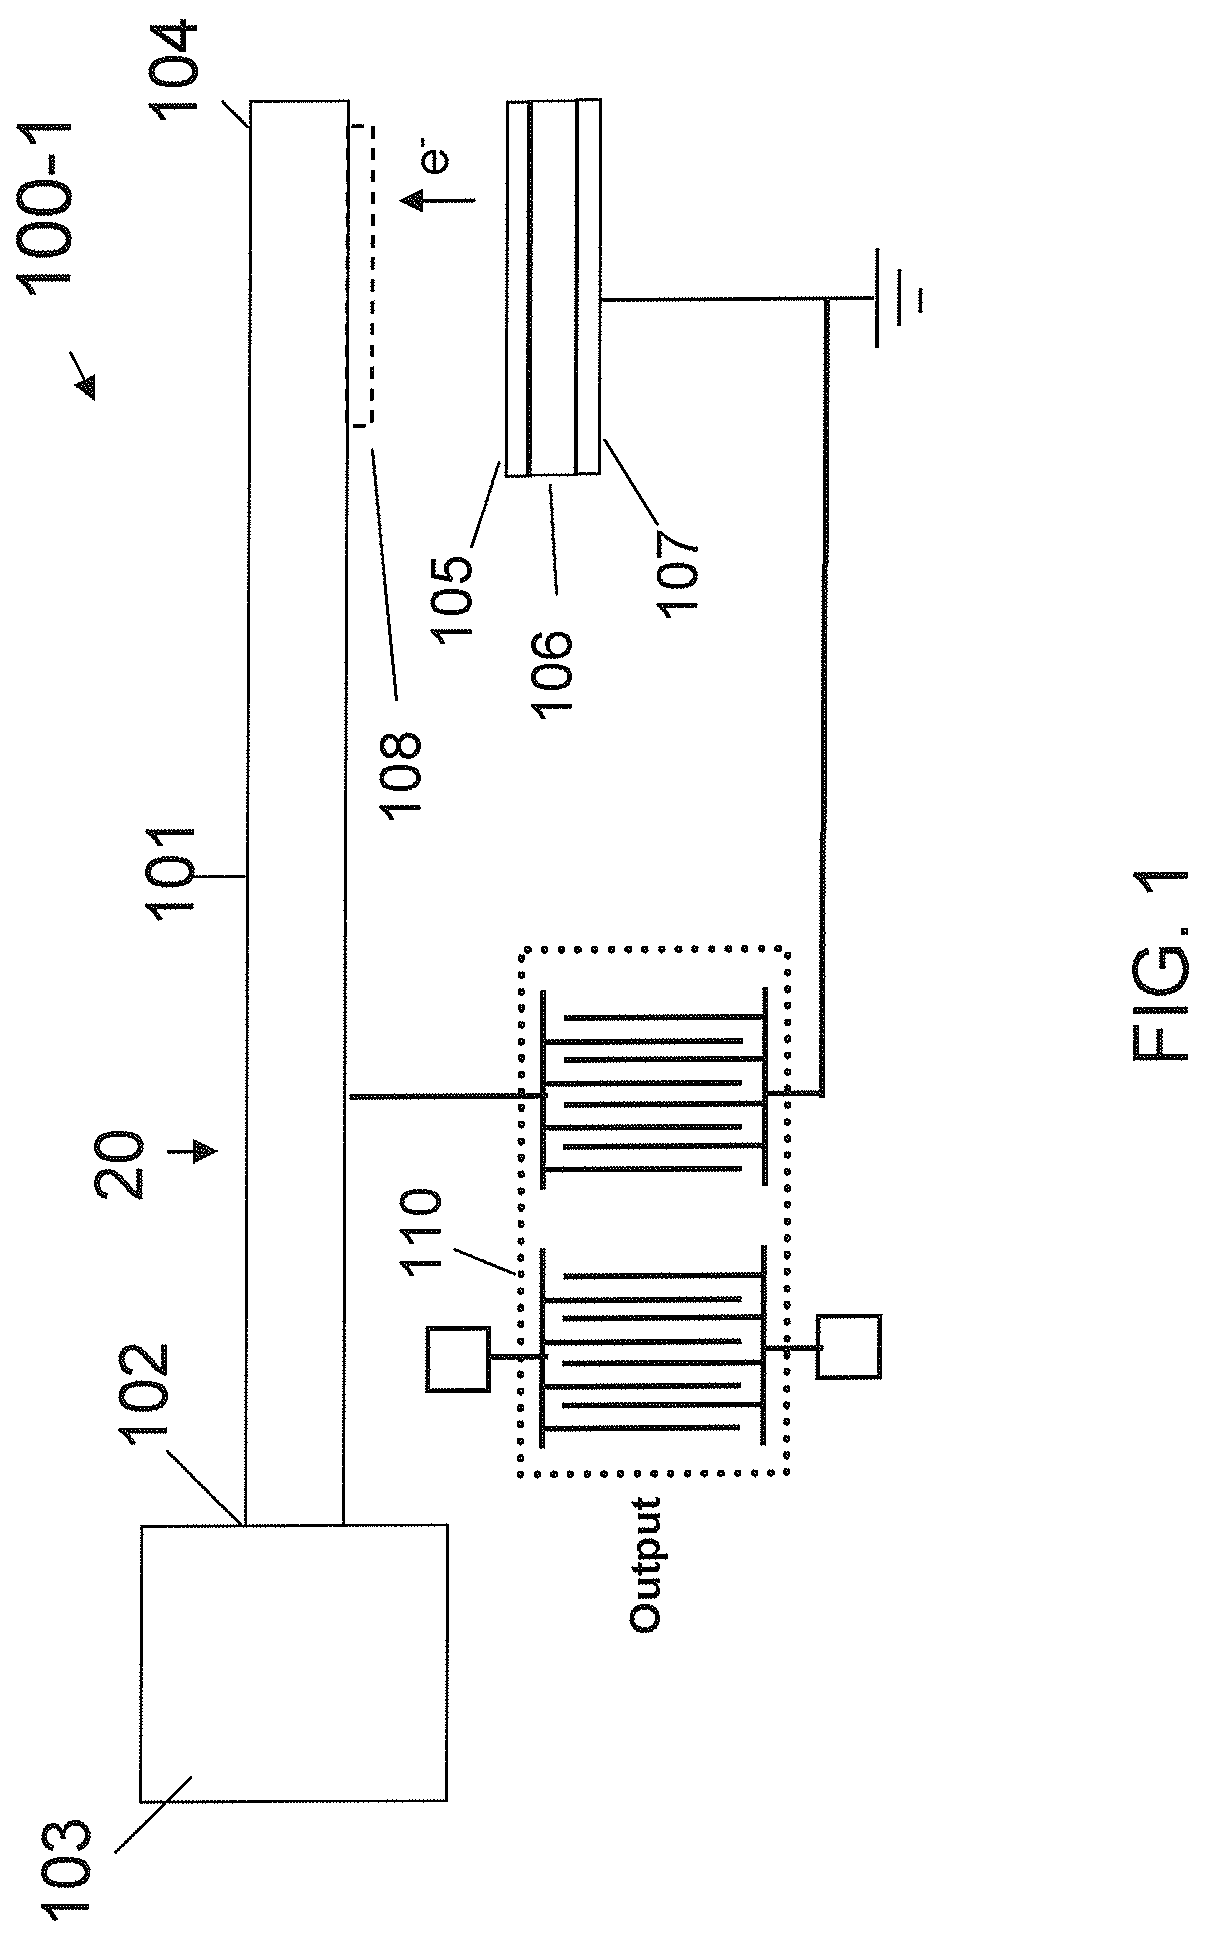 Self-powered, piezo-surface acoustic wave apparatus and method